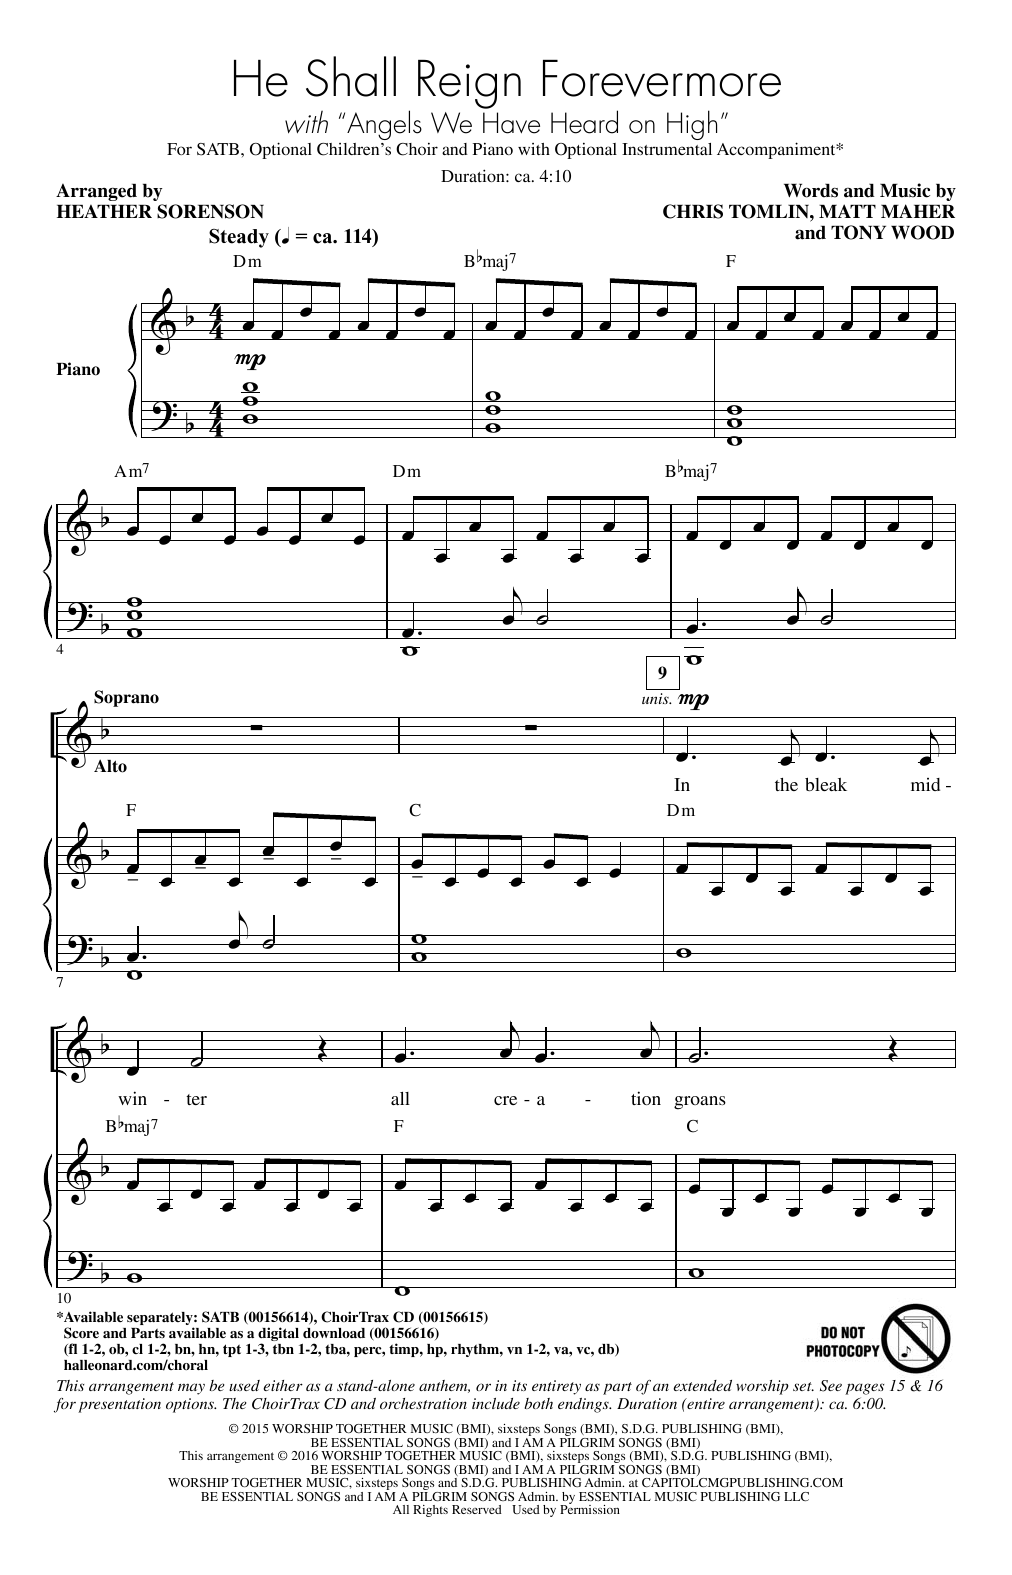 Download Chris Tomlin He Shall Reign Forevermore (arr. Heathe Sheet Music